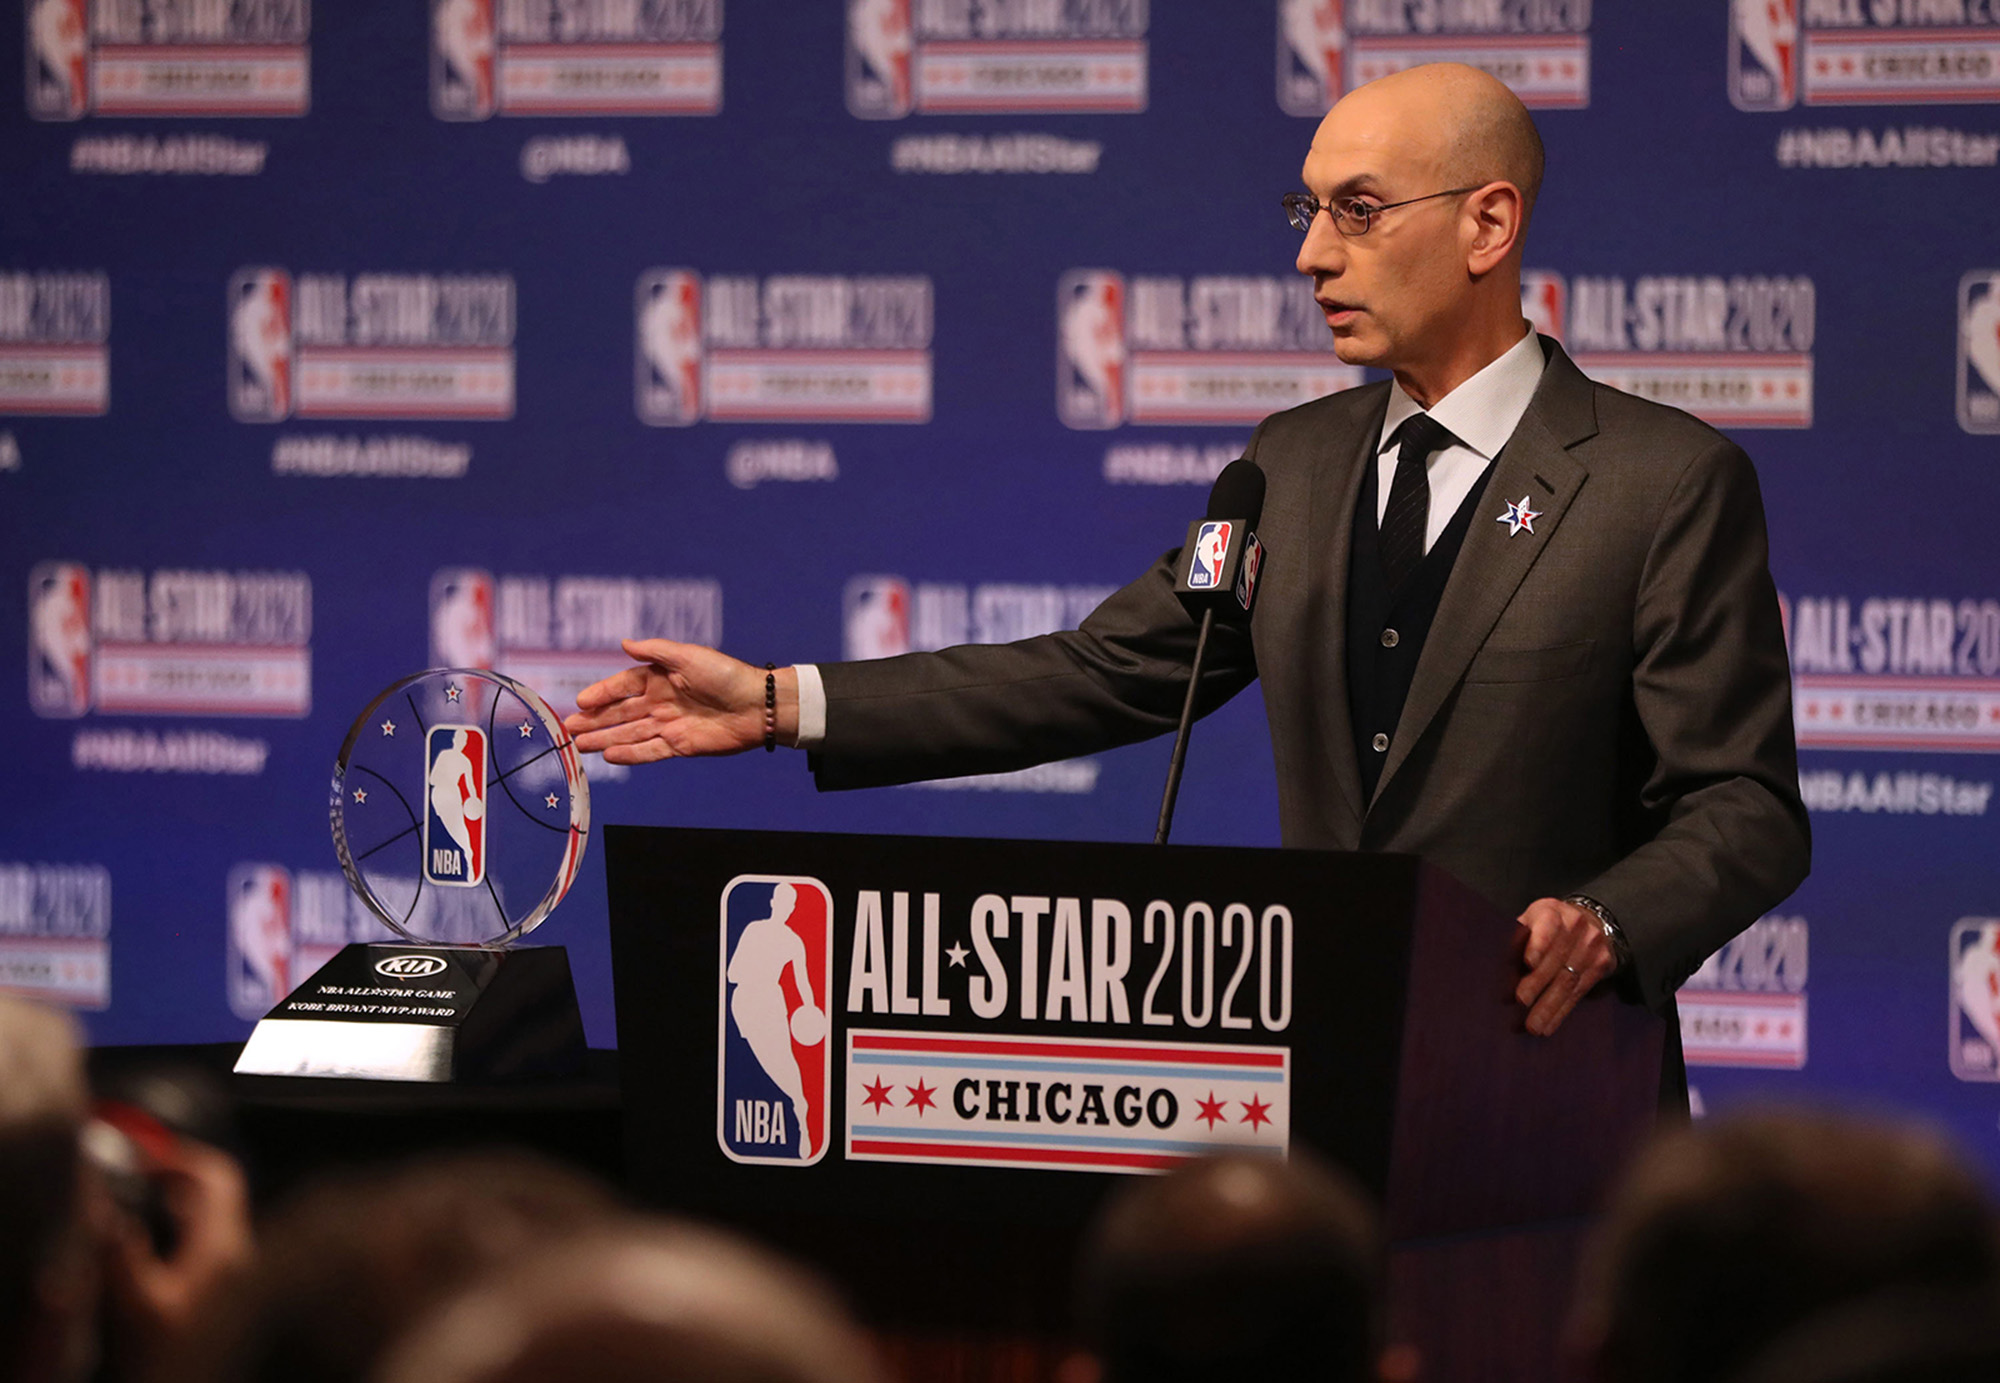 NBA Commissioner Adam Silver talks at a lectern with a crowd in front of him. He gestures with his right hand toward an NBA trophy. The lection has an NBA logo to the left and the text "ALL STAR 2020 Chicago" next to it.